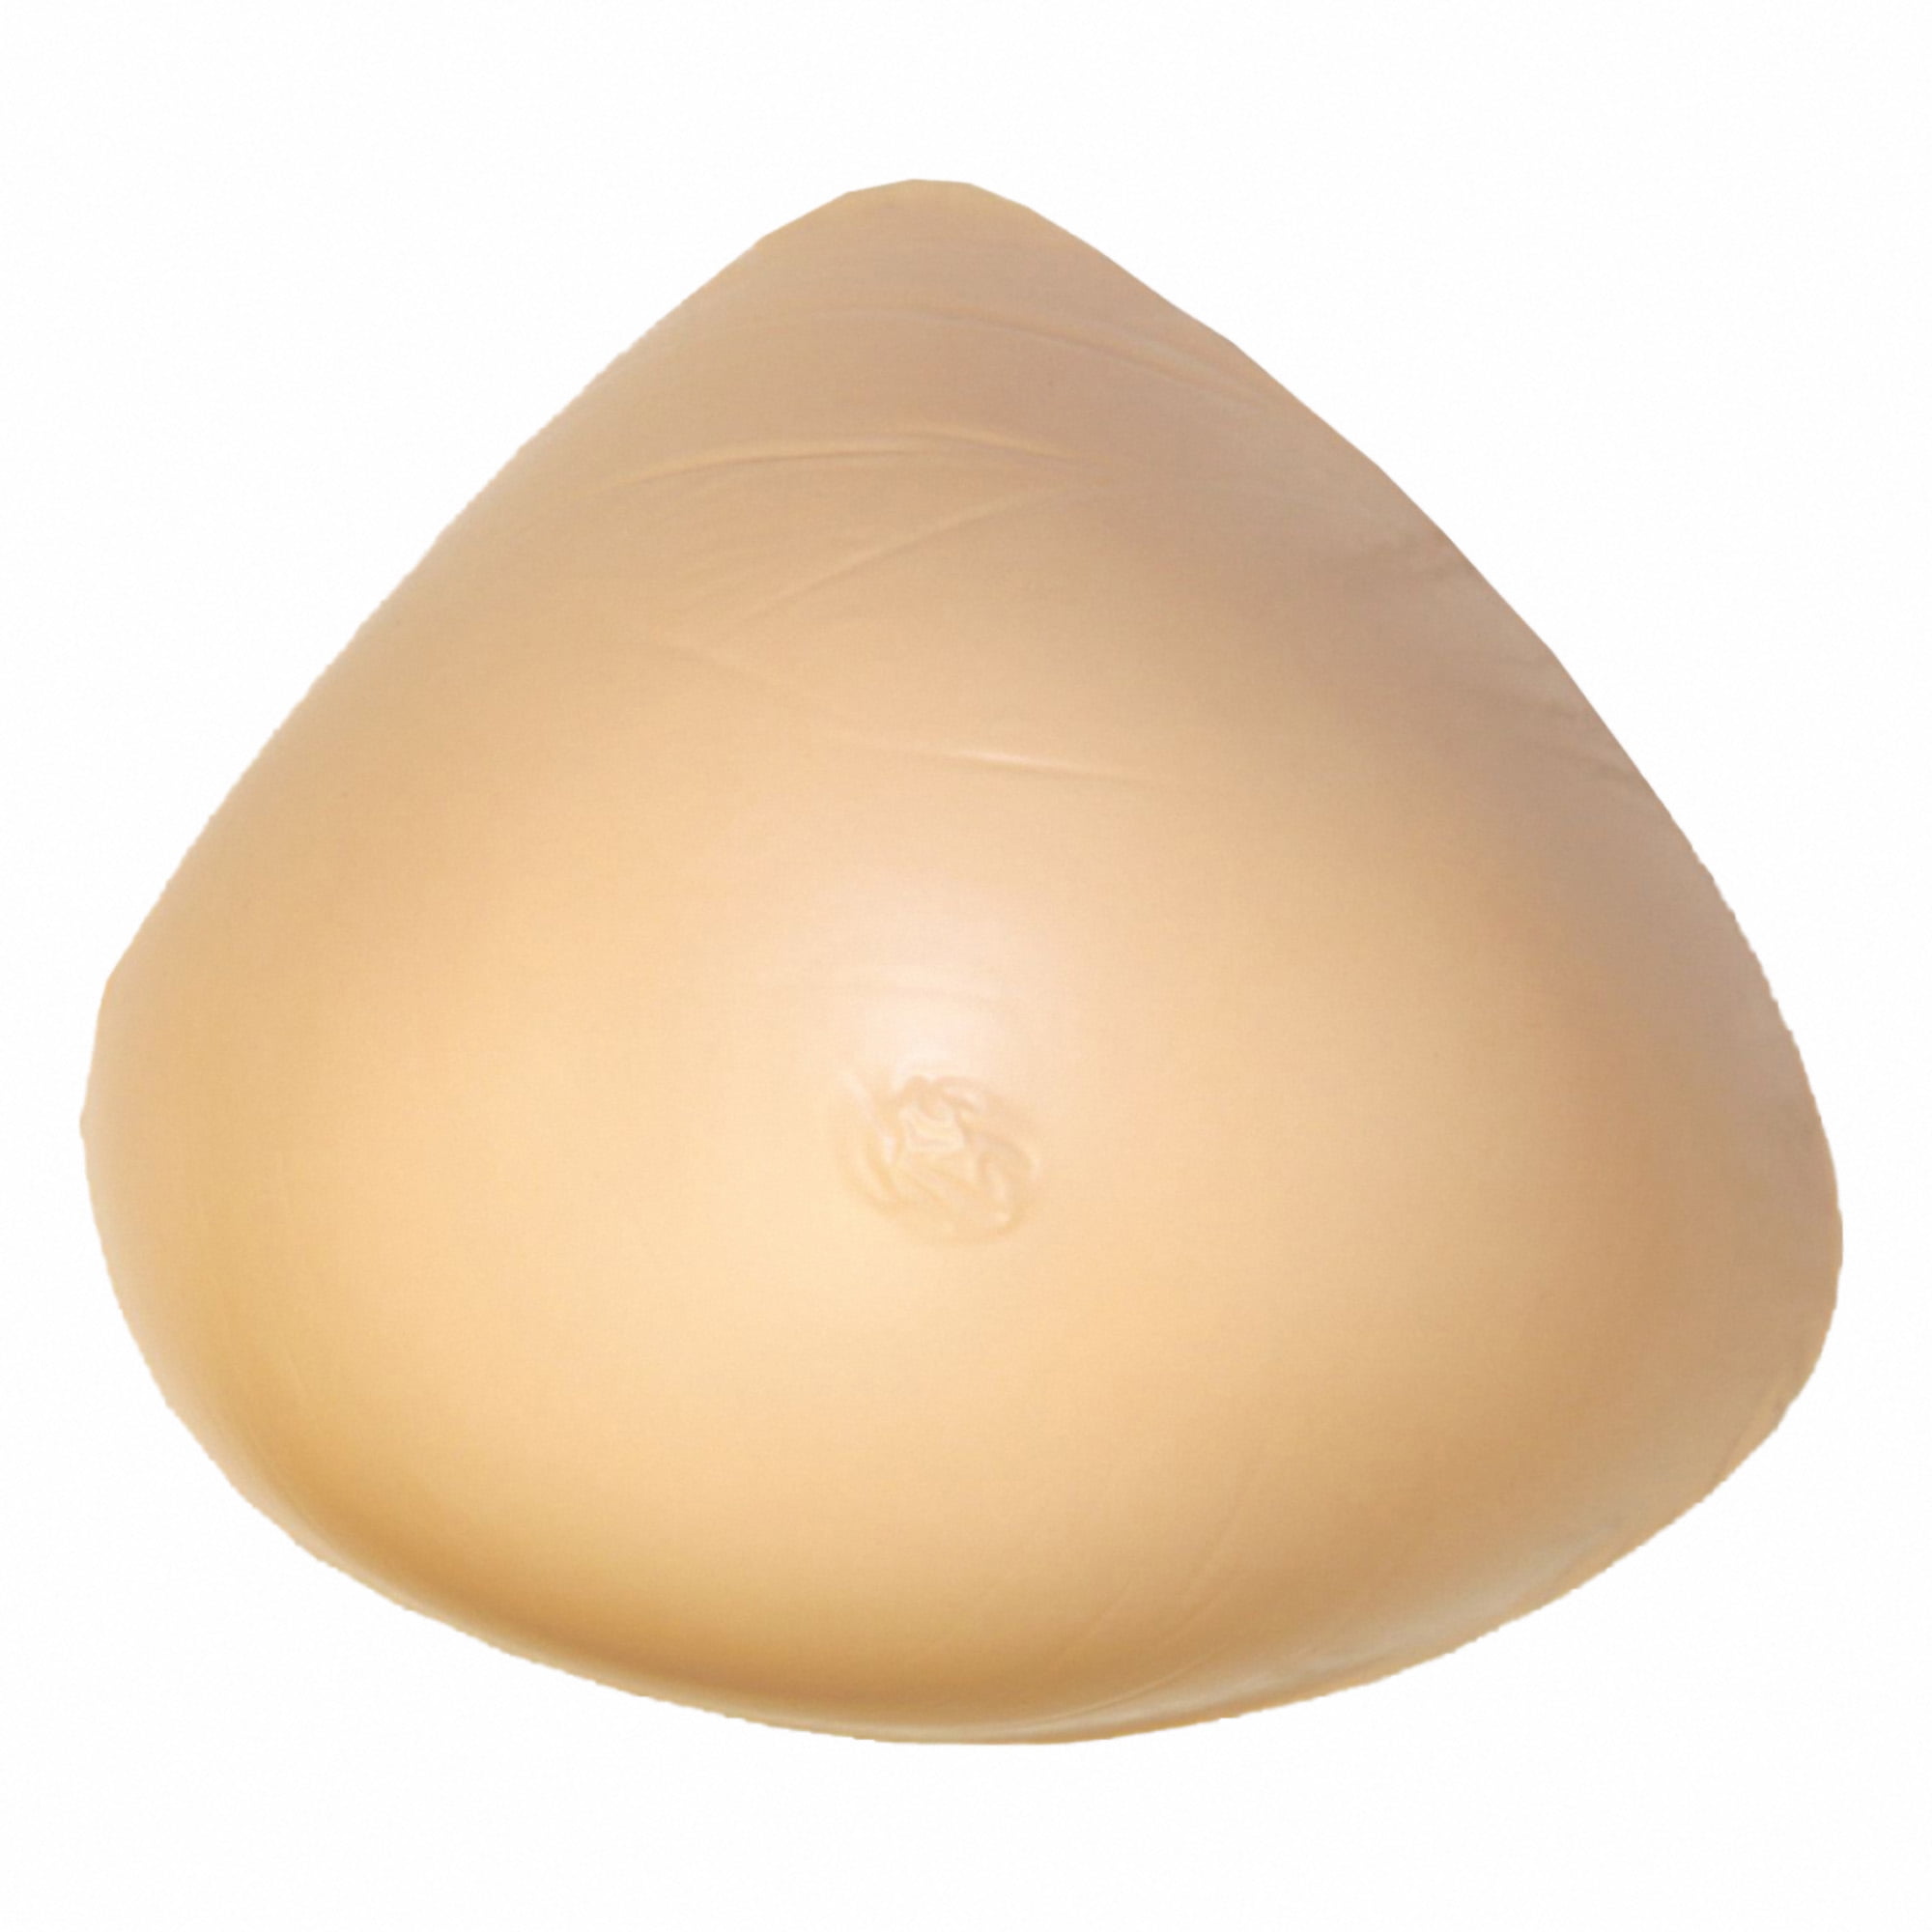 Silicone Breast Forms Fake Boobs Waterdrop Enhancers For CD TV TG Cosplay  Mastectomy 1 Pair 1000g C Cup 